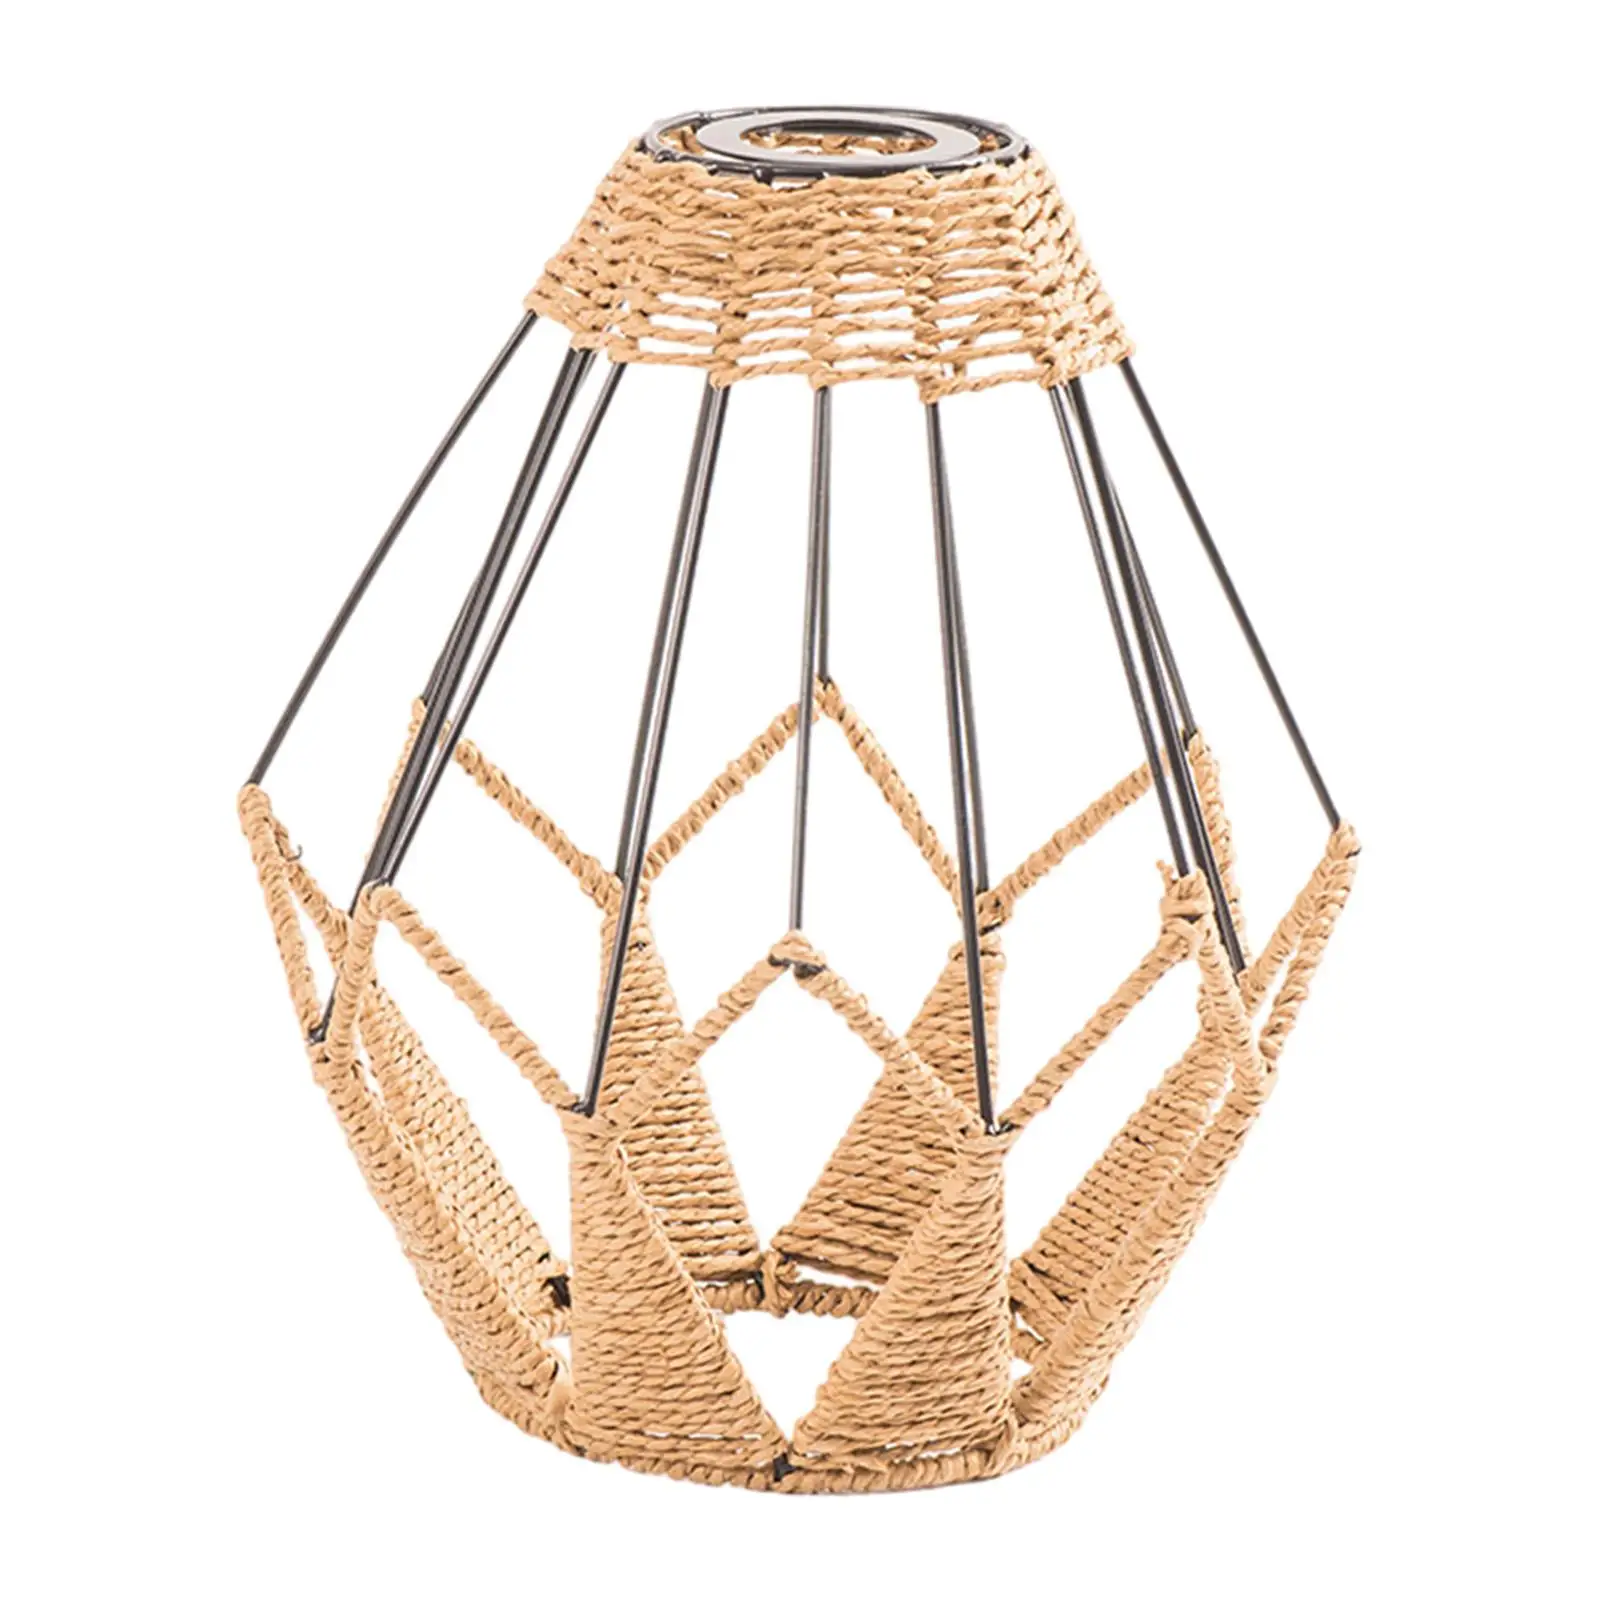 Woven Lampshade Lighting Fixtures Decoration Dustproof Ceiling Lantern Cover for Living Room Dining Table